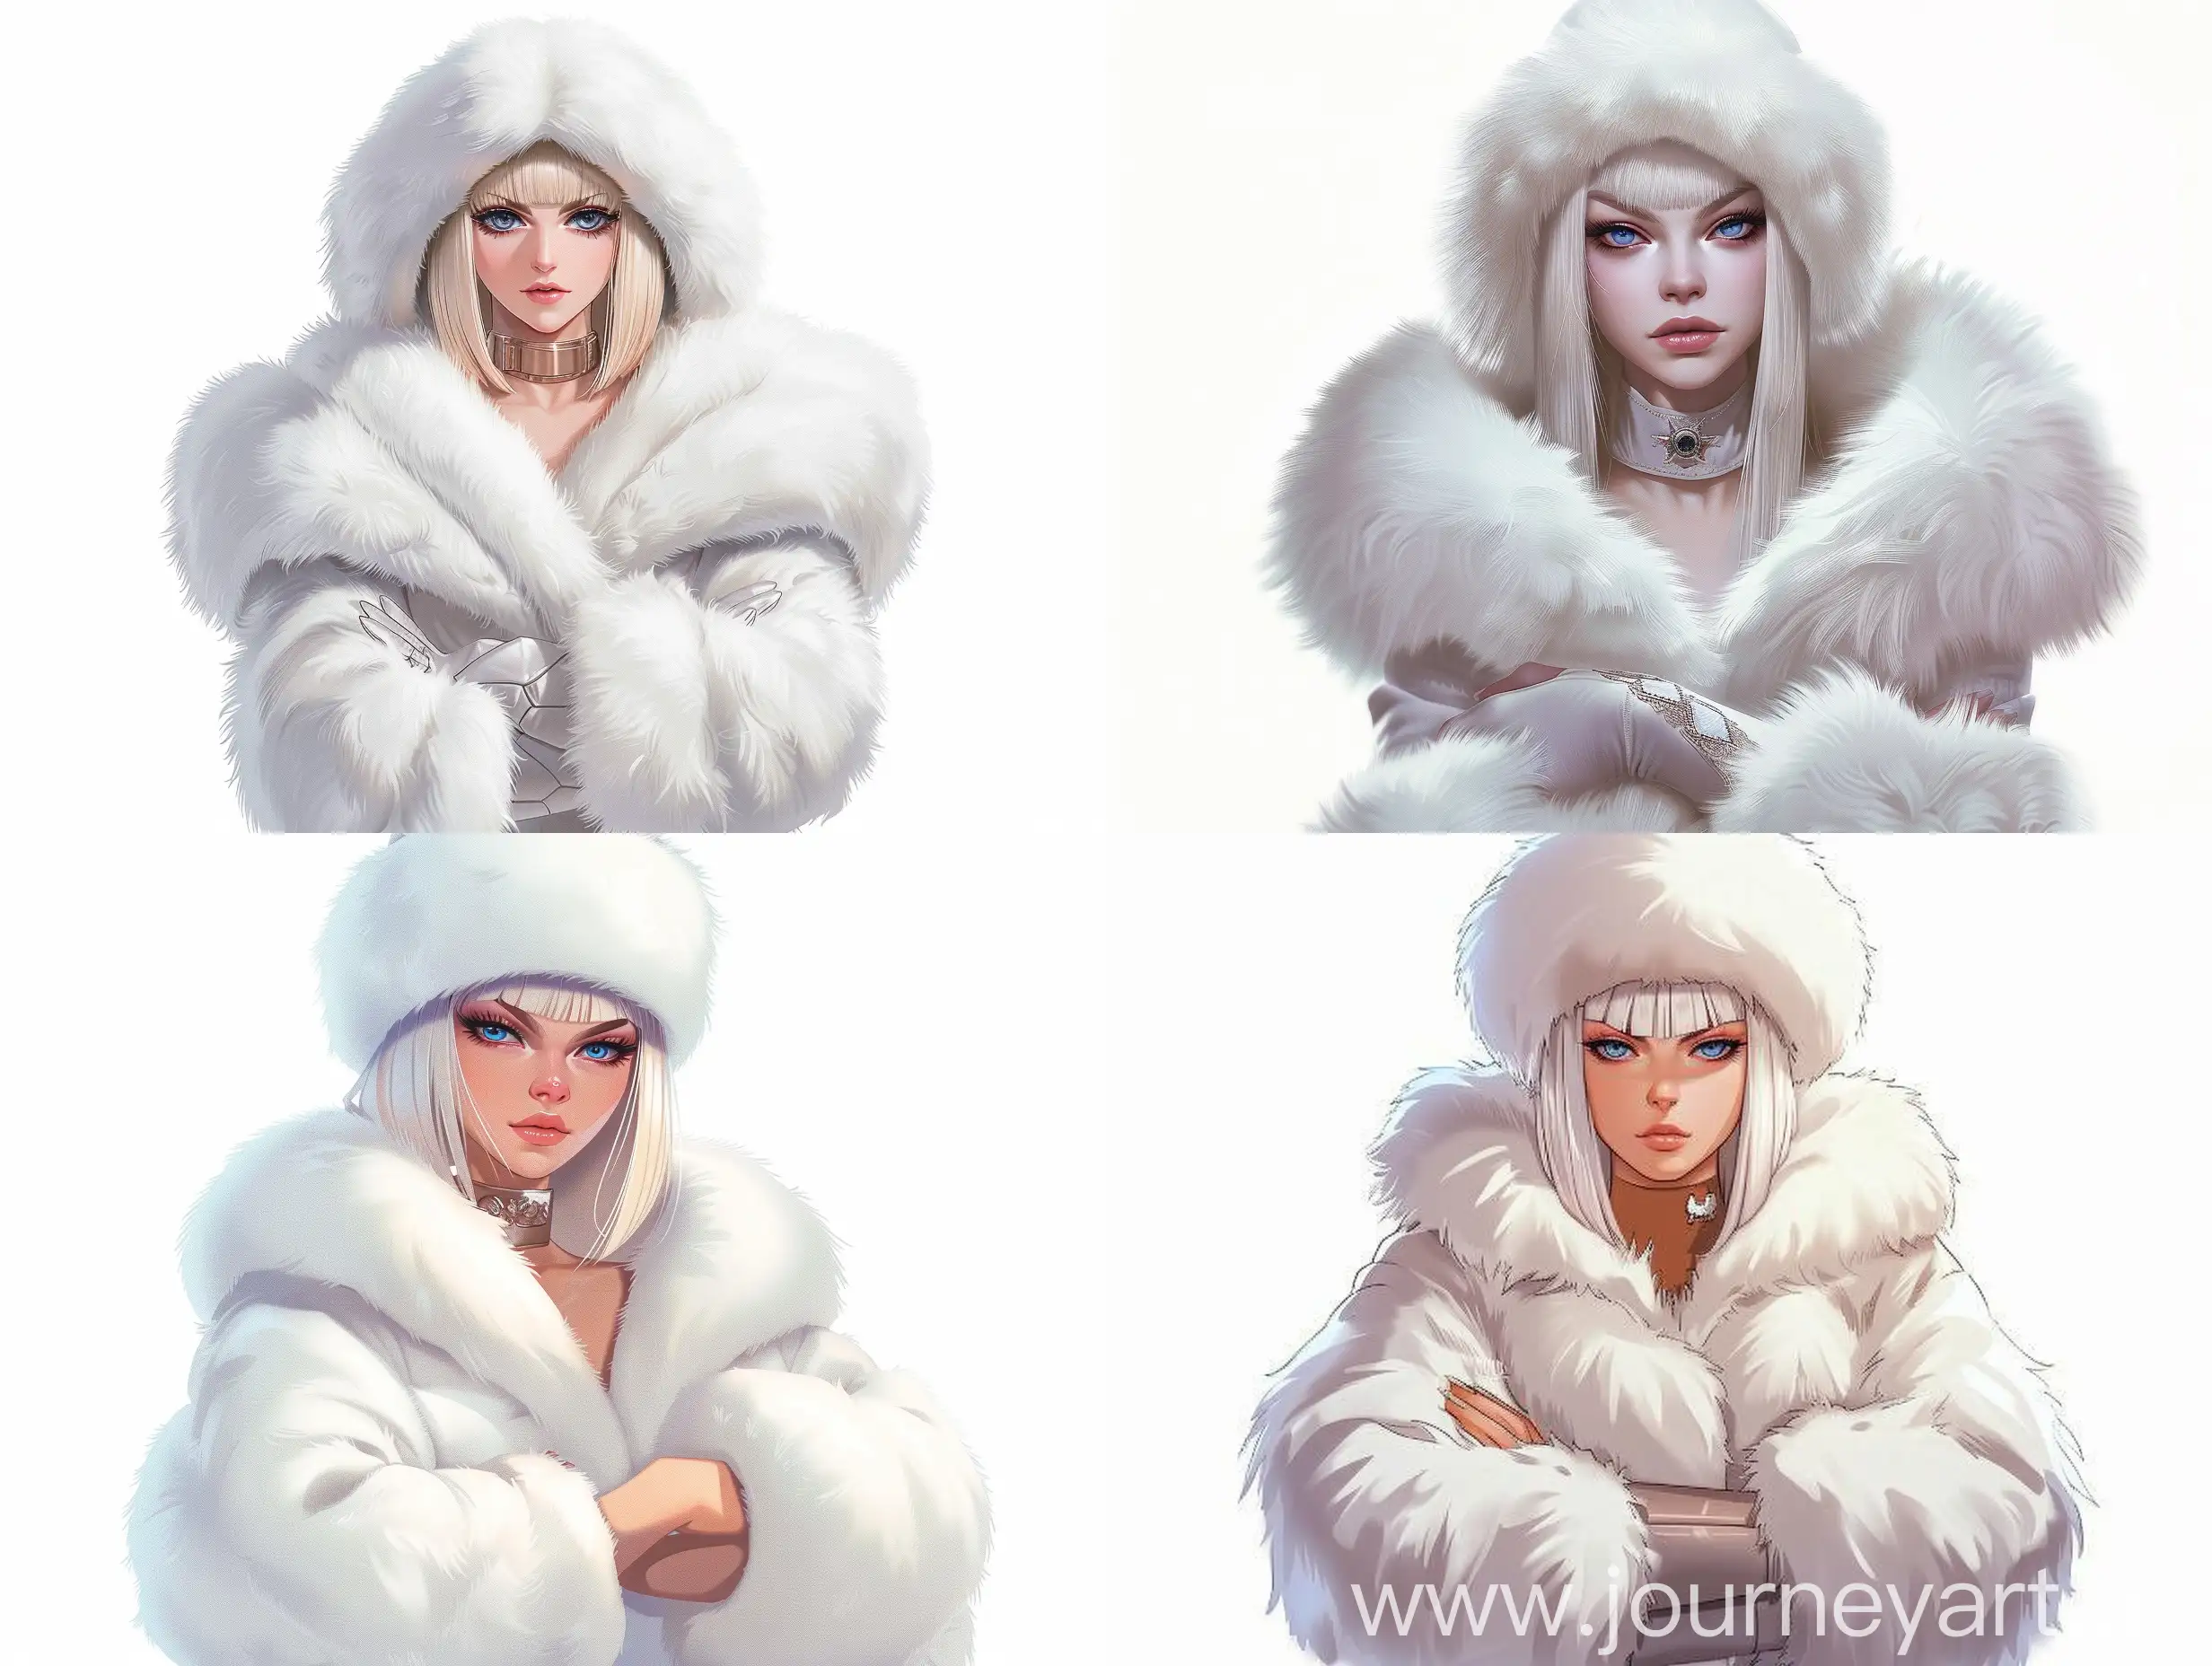 adult woman, arrogant look, rich in appearance, Russian appearance, shoulder-length straight blonde hair, white fur hat, blue eyes, dressed in a white fluffy fur coat completely covering her, standing at full height with her arms crossed, on a white background, in different directions concept art, anime style